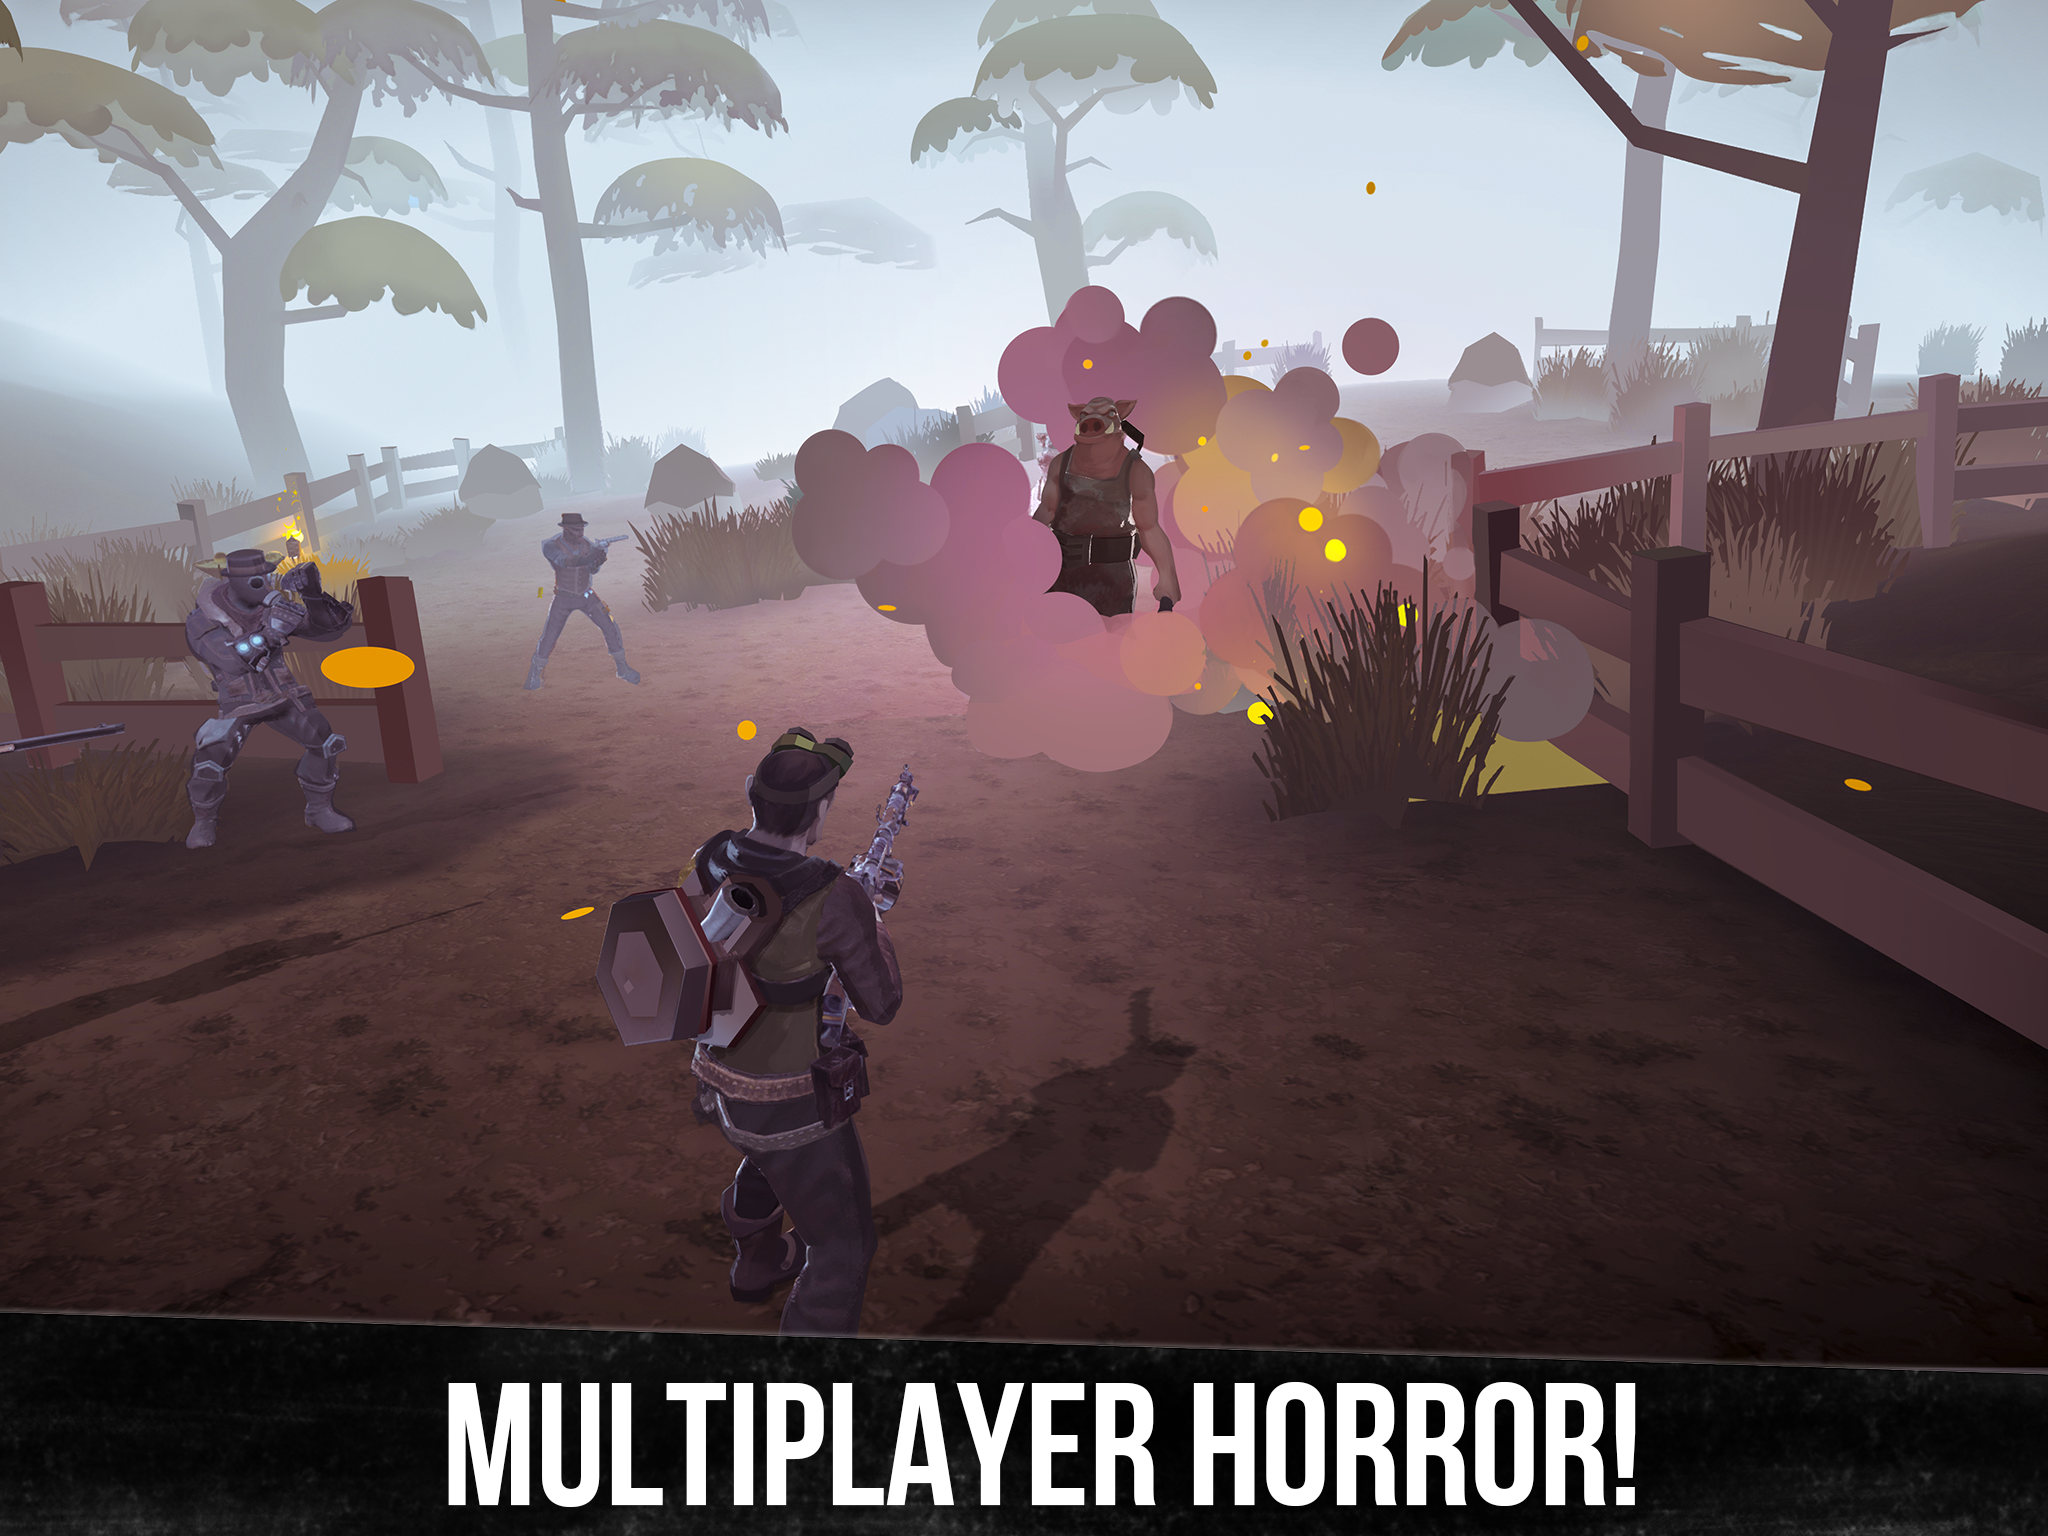 5 Scary Yet Fun Multiplayer Horror Games for Android That You Should Play